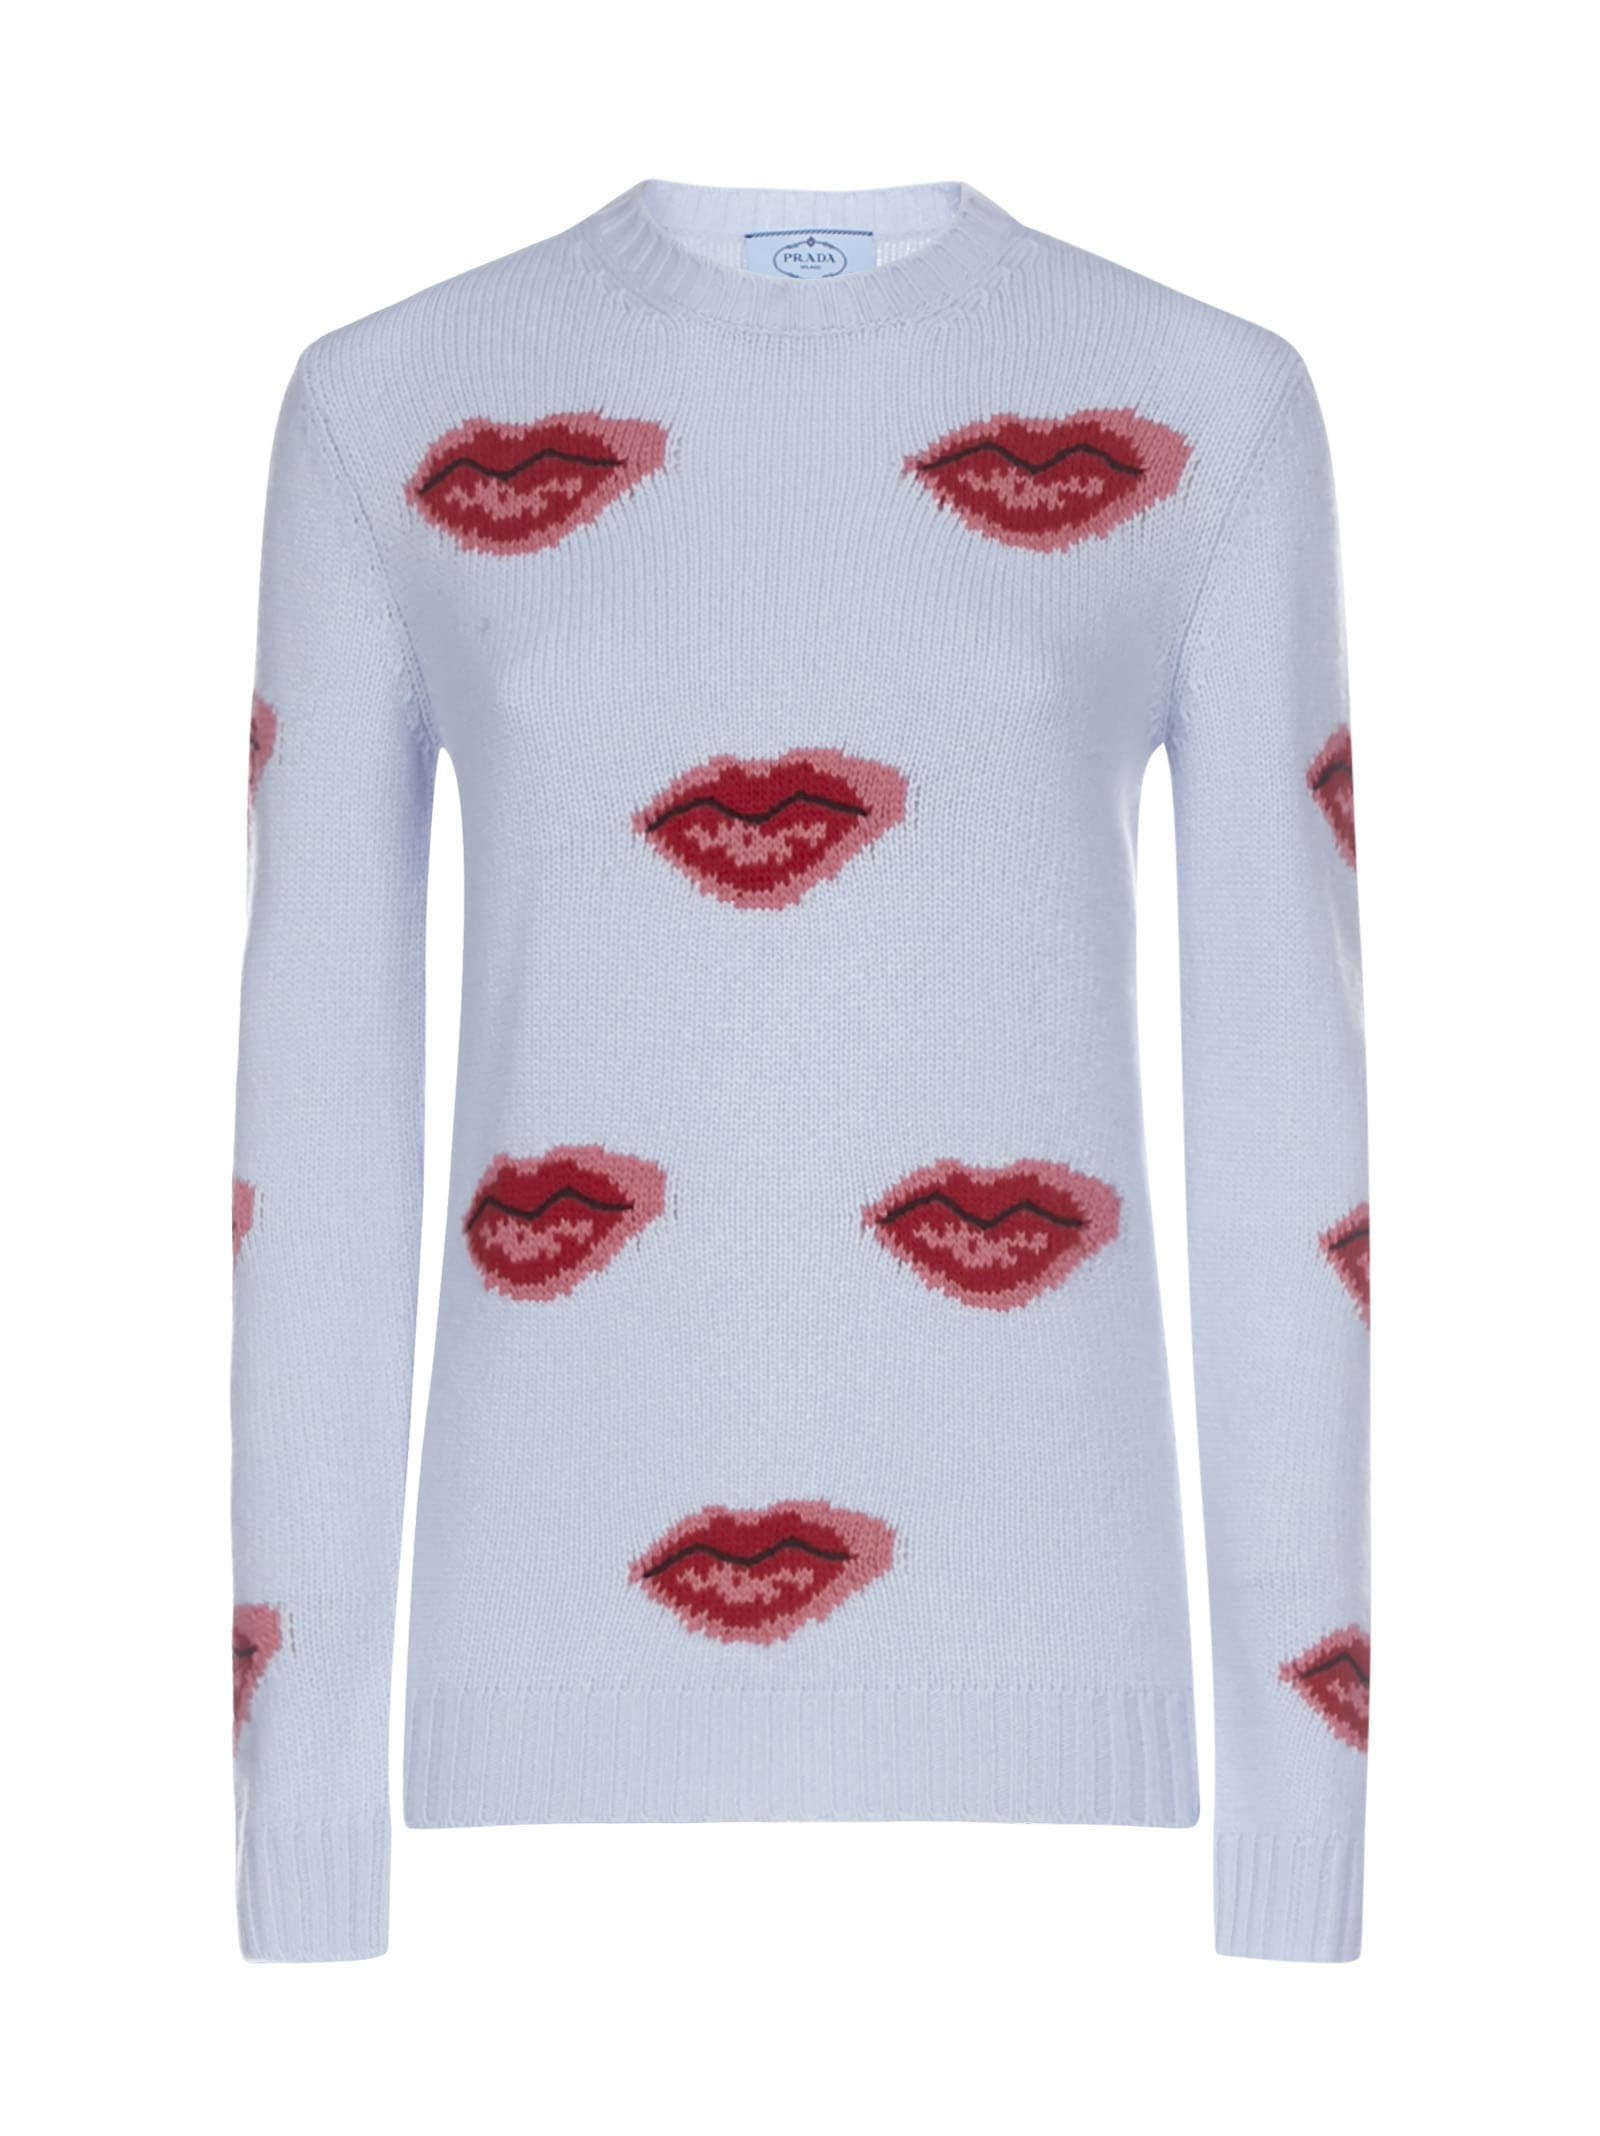 PRADA MOUTH-MOTIF WOOL AND CASHMERE SWEATER,11211834